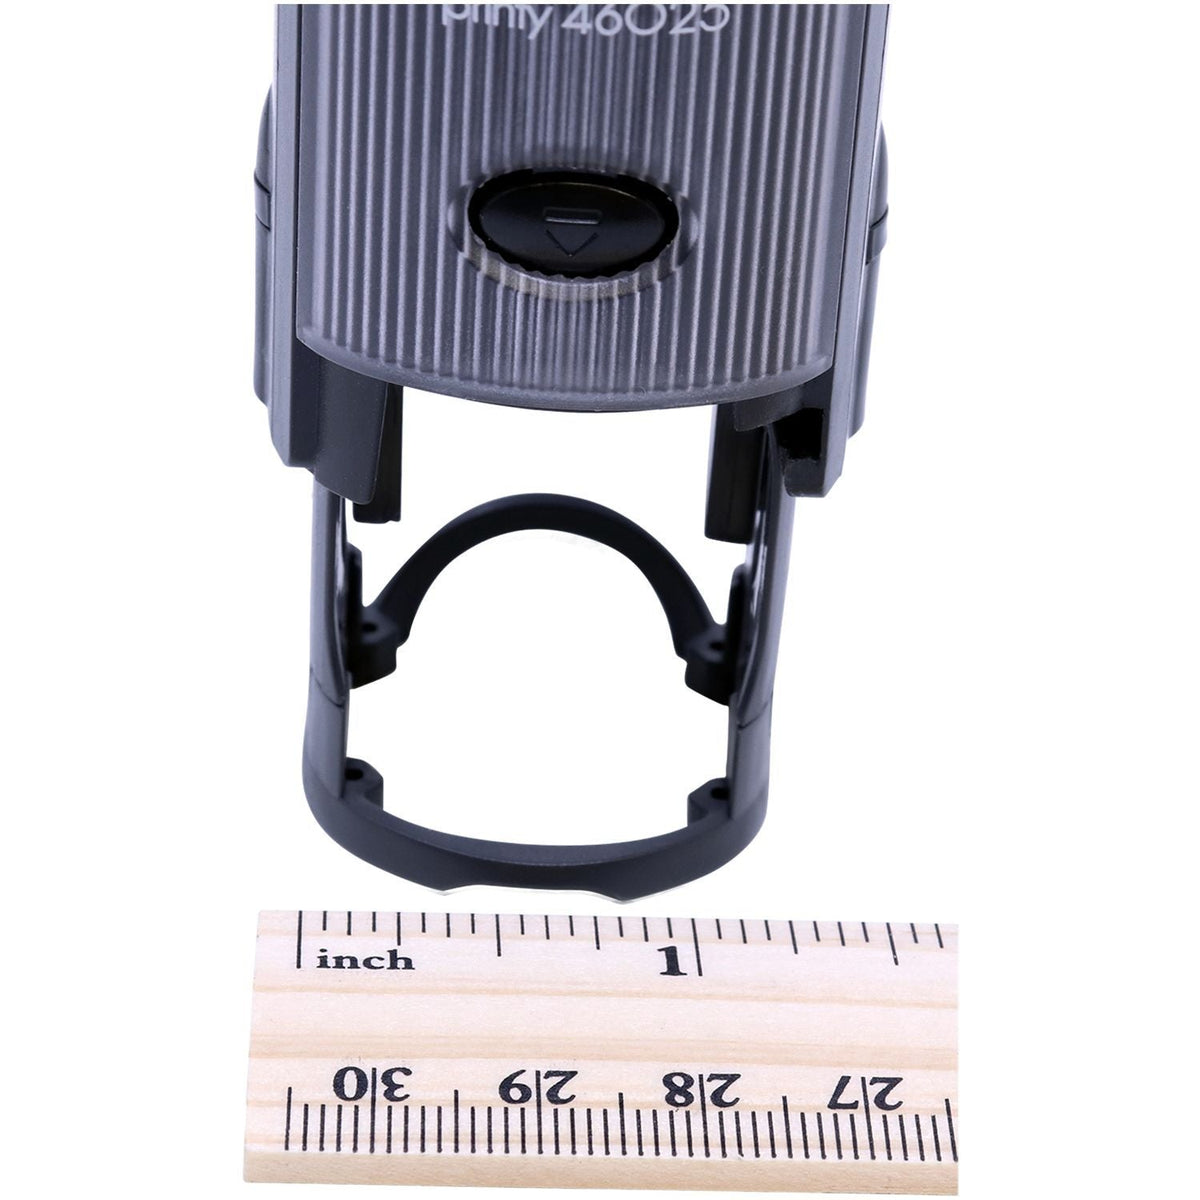 Measurment of Self-Inking Round File Stamp with Ruler